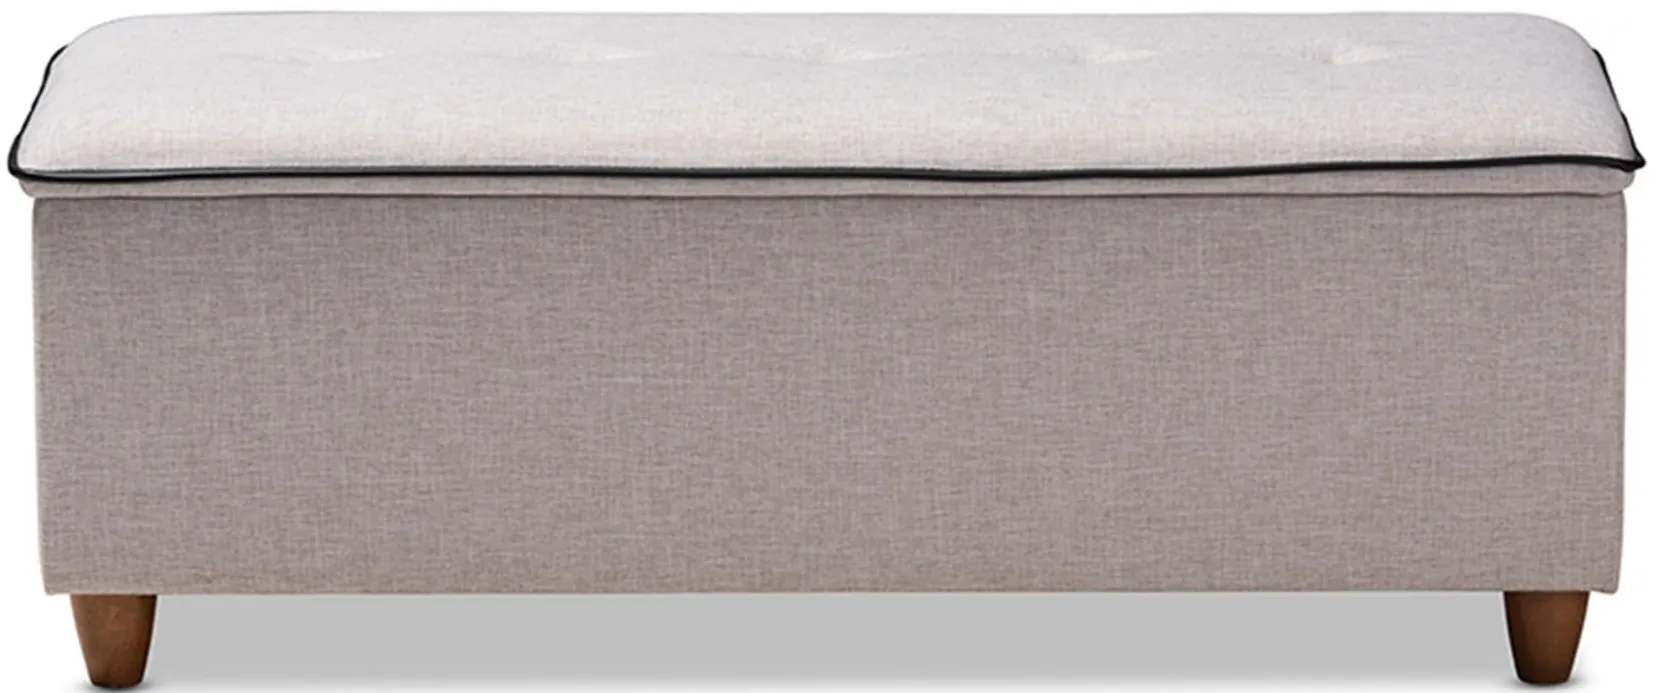 Marlisa Storage Ottoman Bench in Gray by Wholesale Interiors